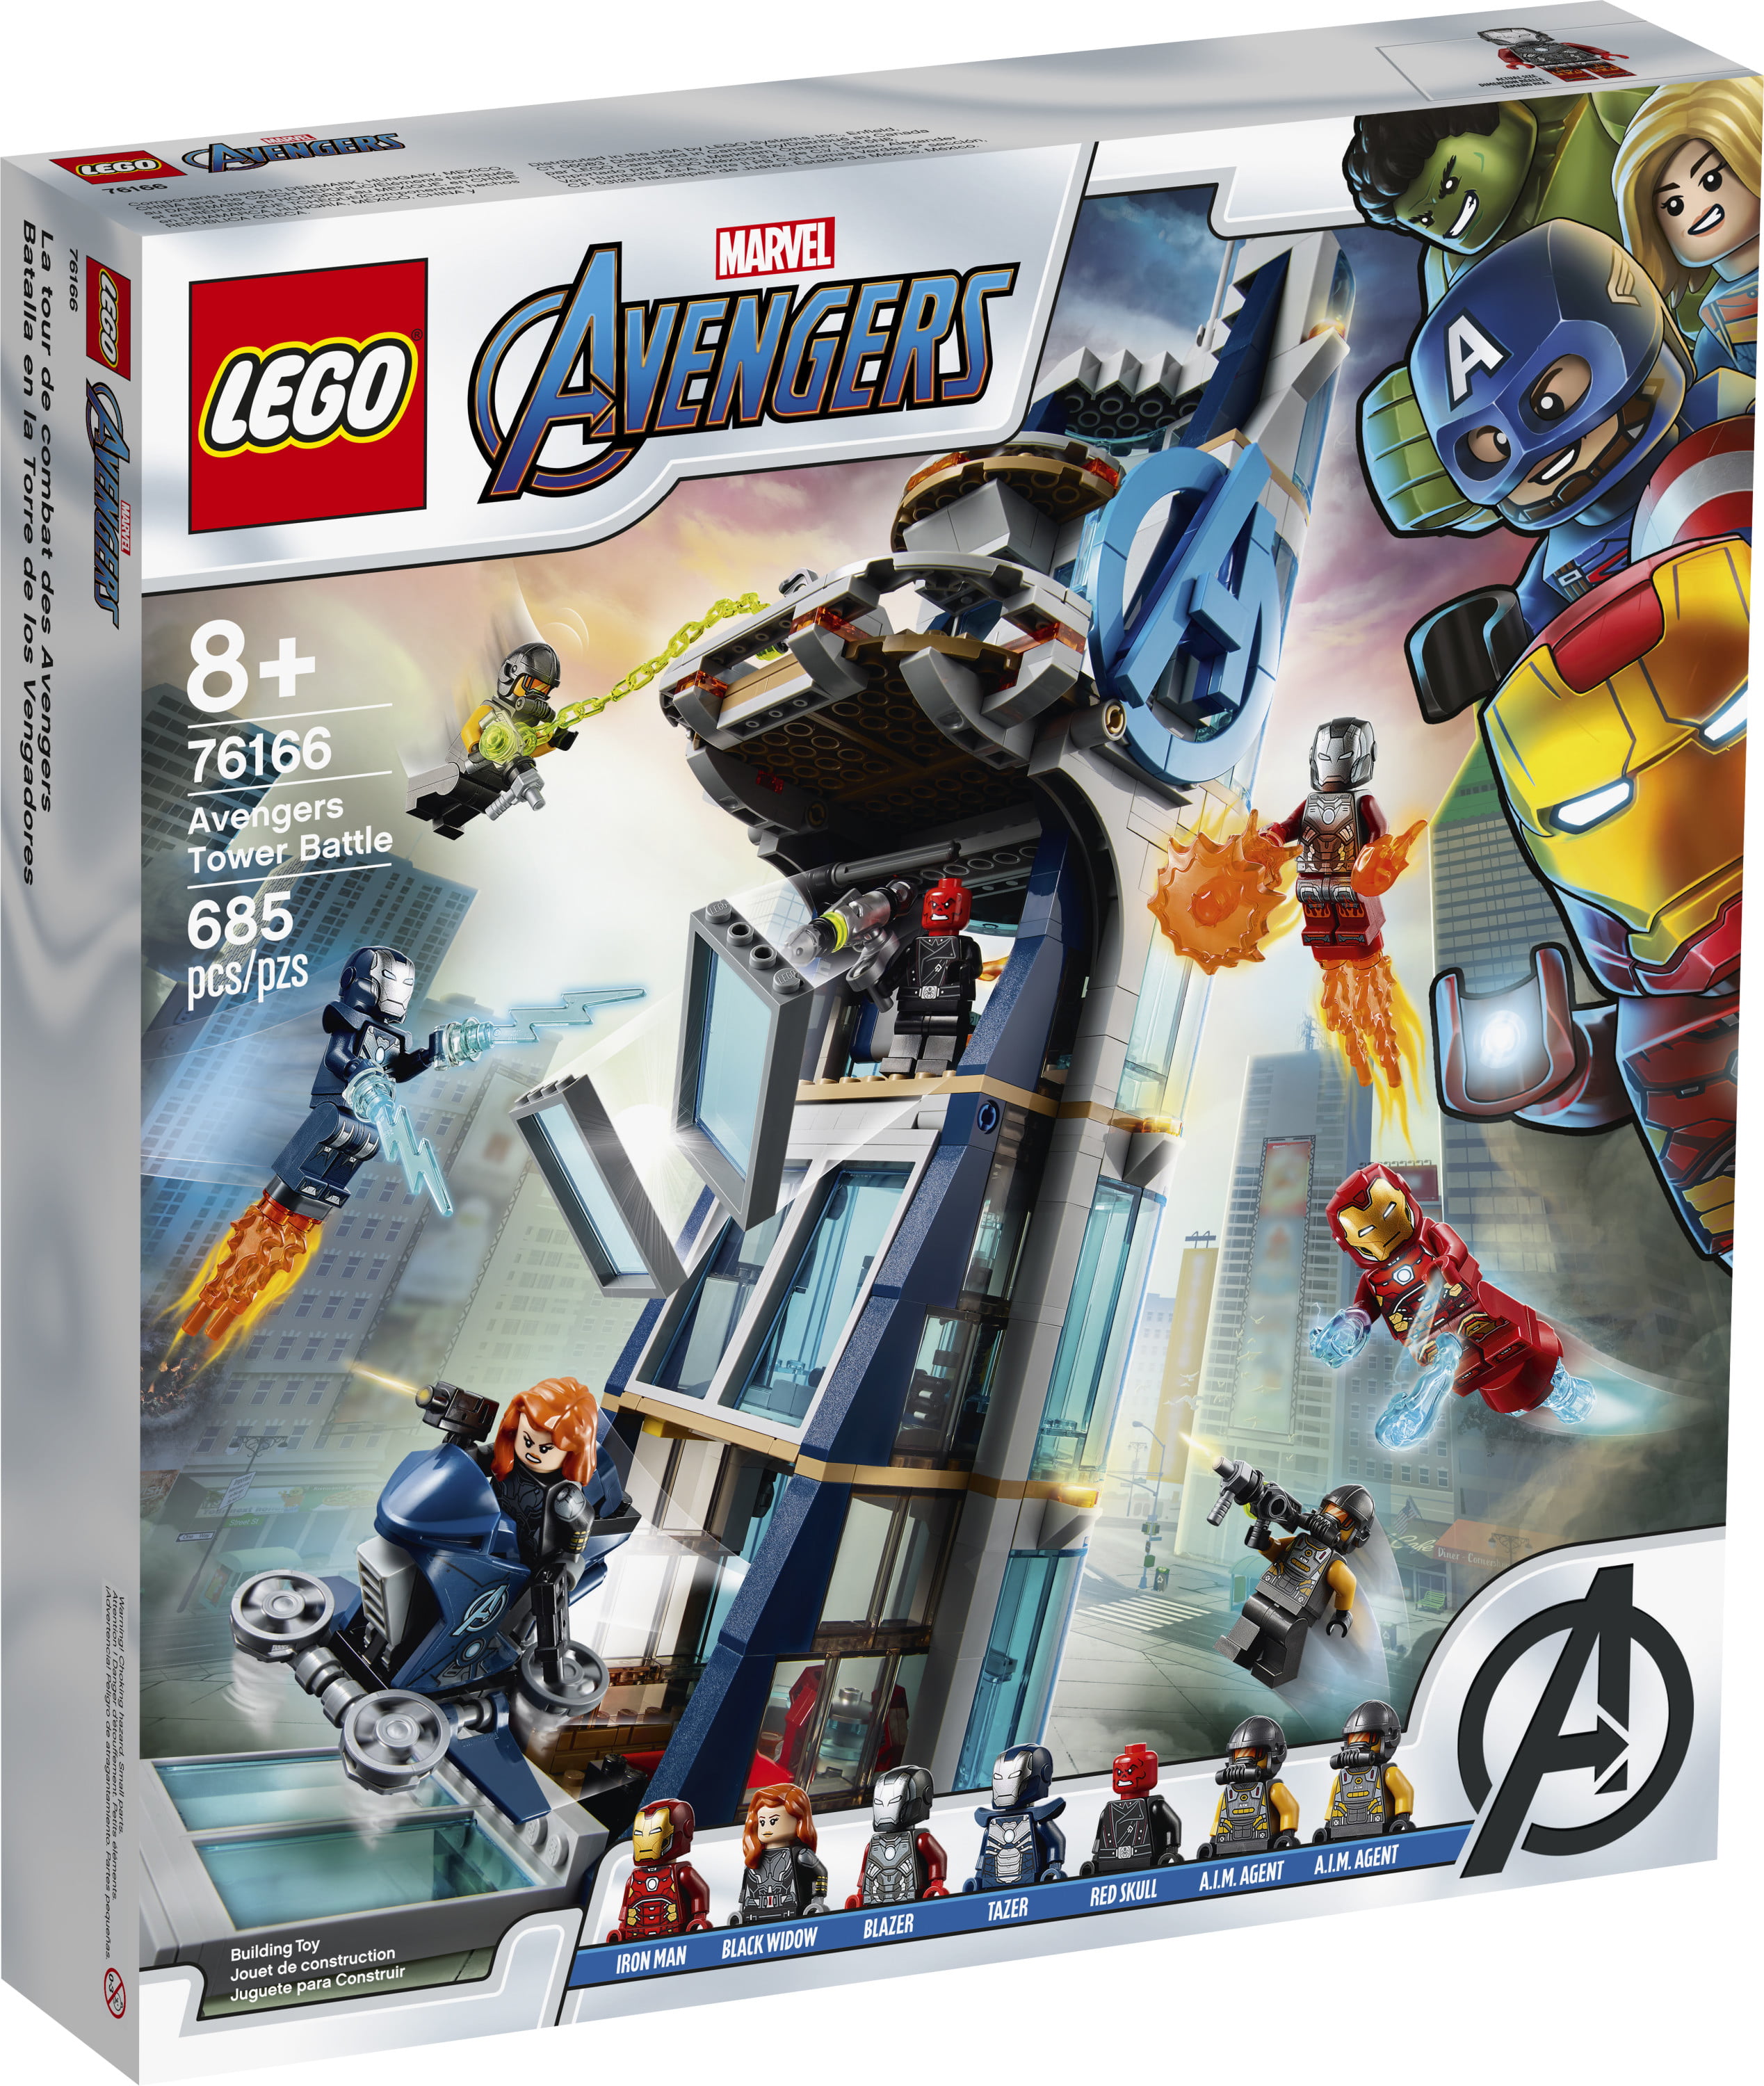 LEGO Marvel Avengers: Avengers Tower Battle 76166 Brick Building Toy with  Action Scenes (687 Pieces)